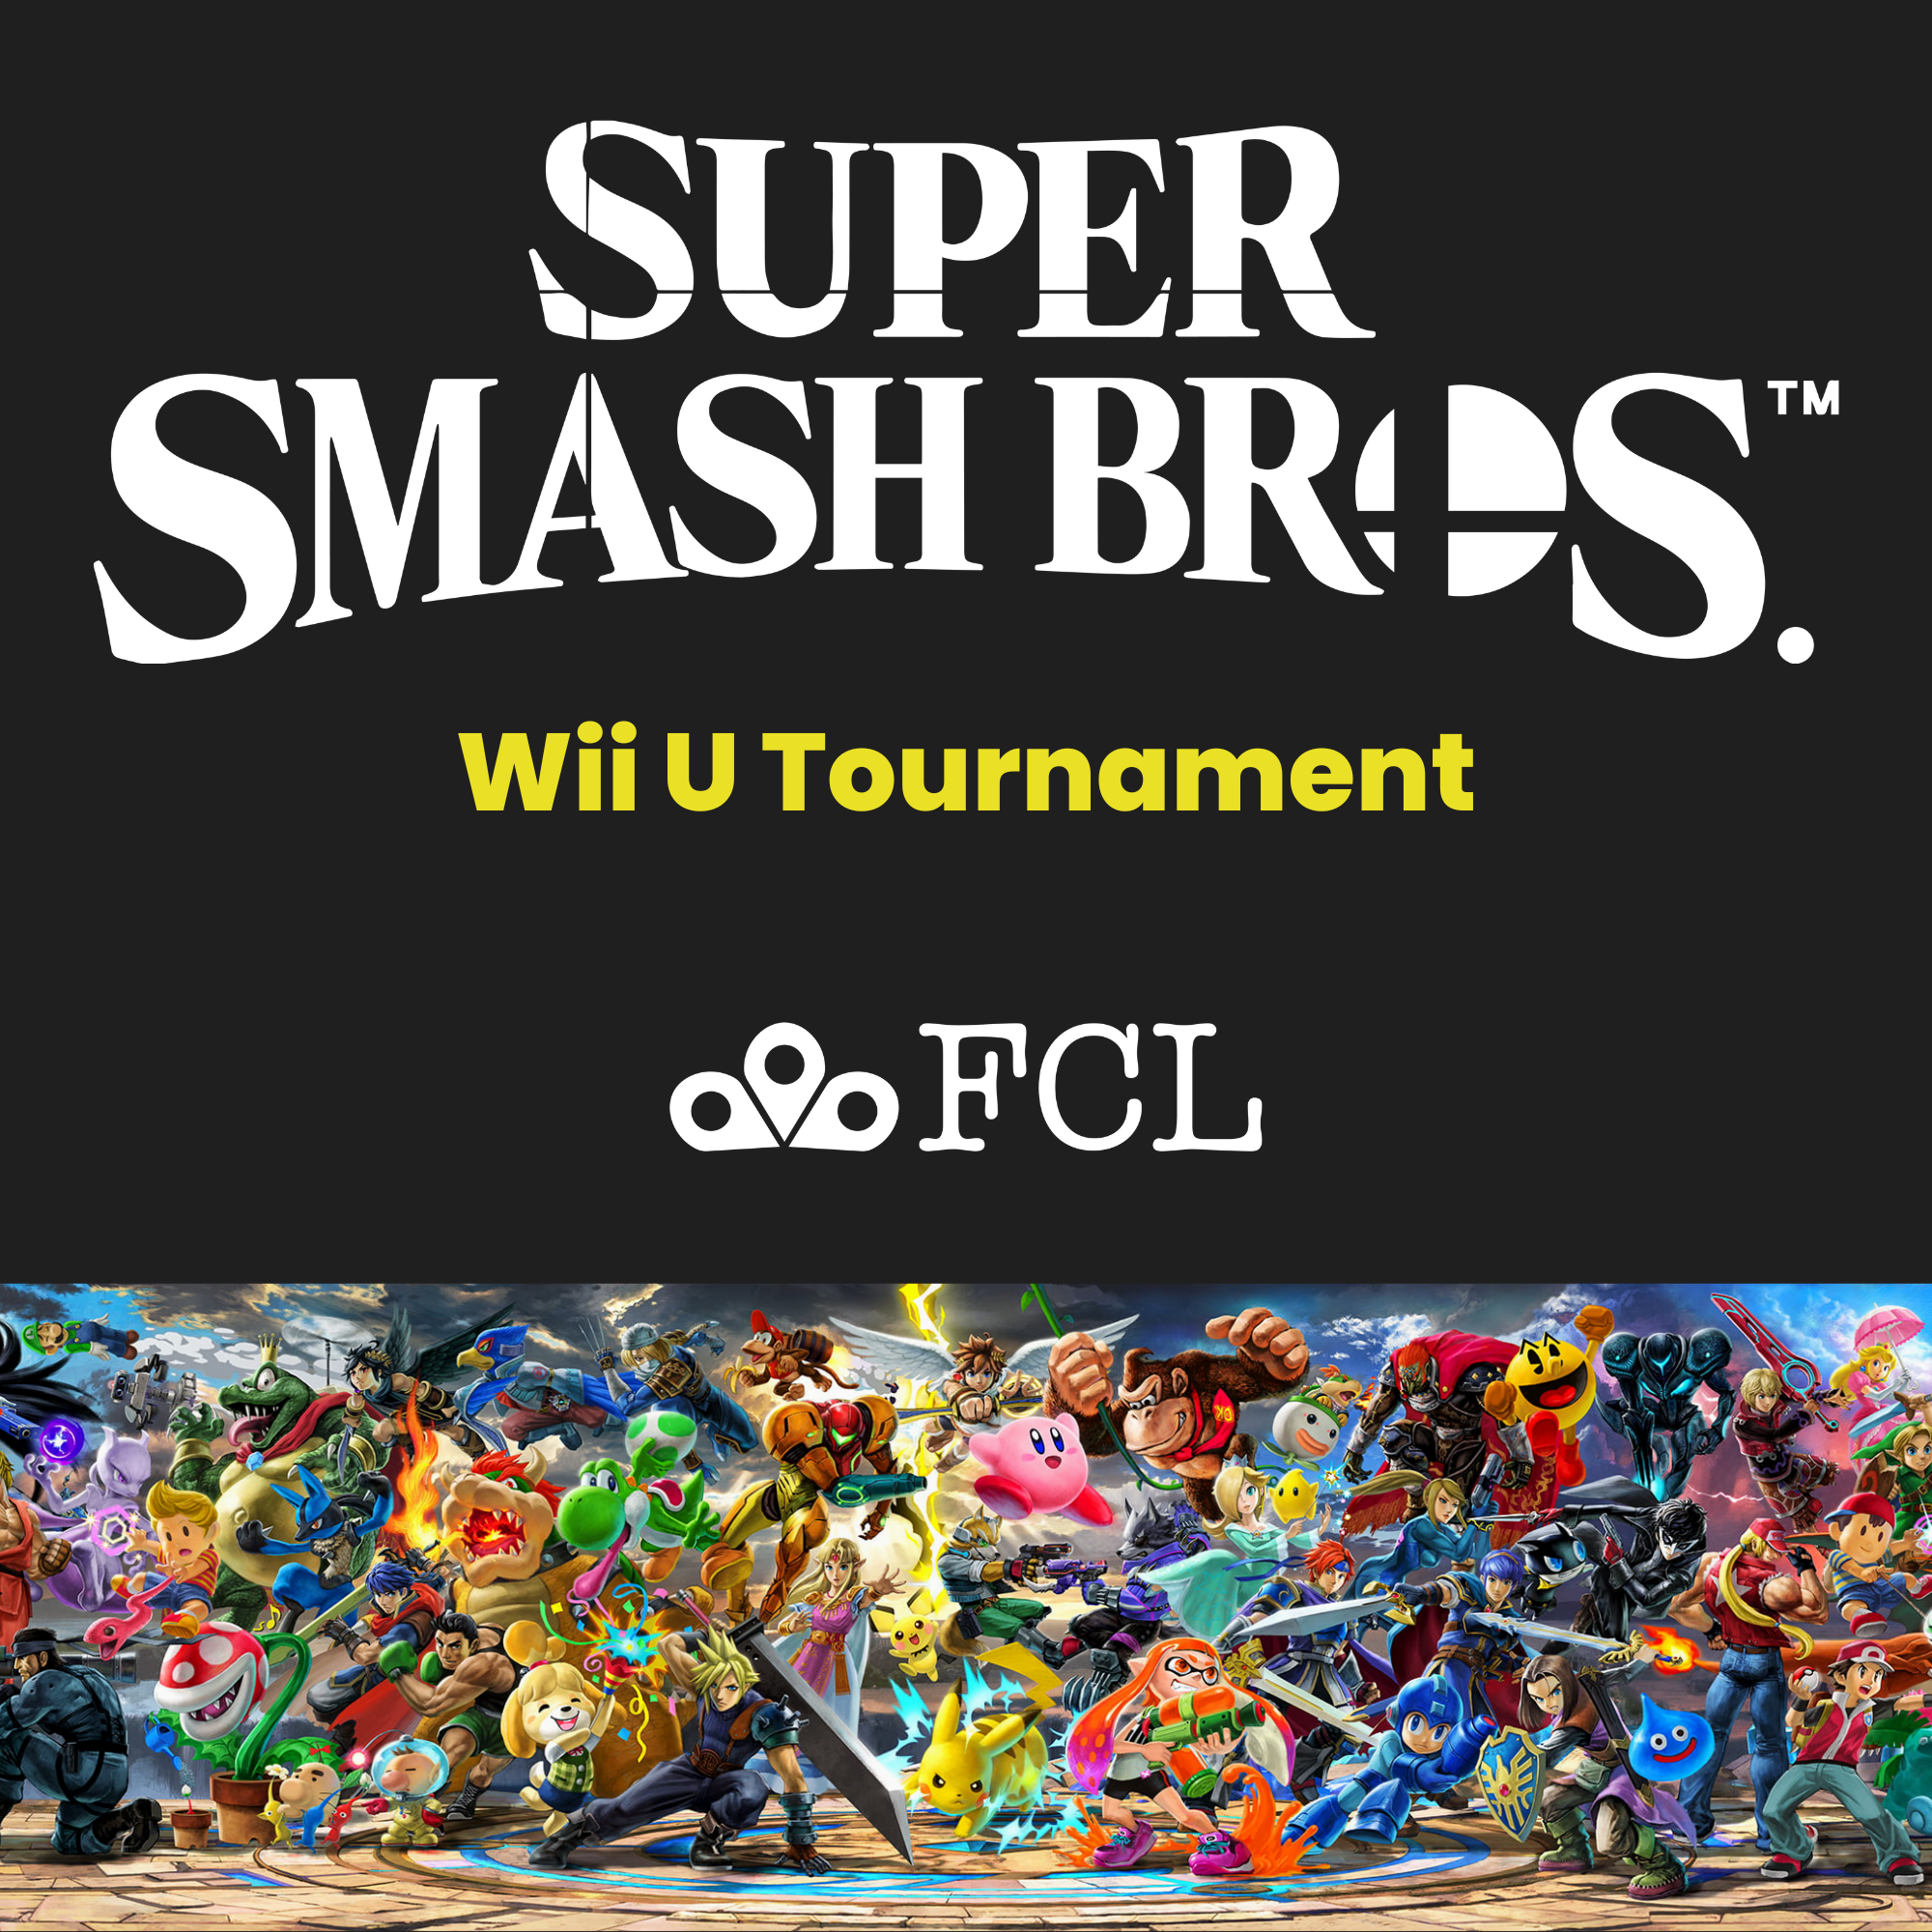 Super Smash Brothers logo and graphic of the video game's characters